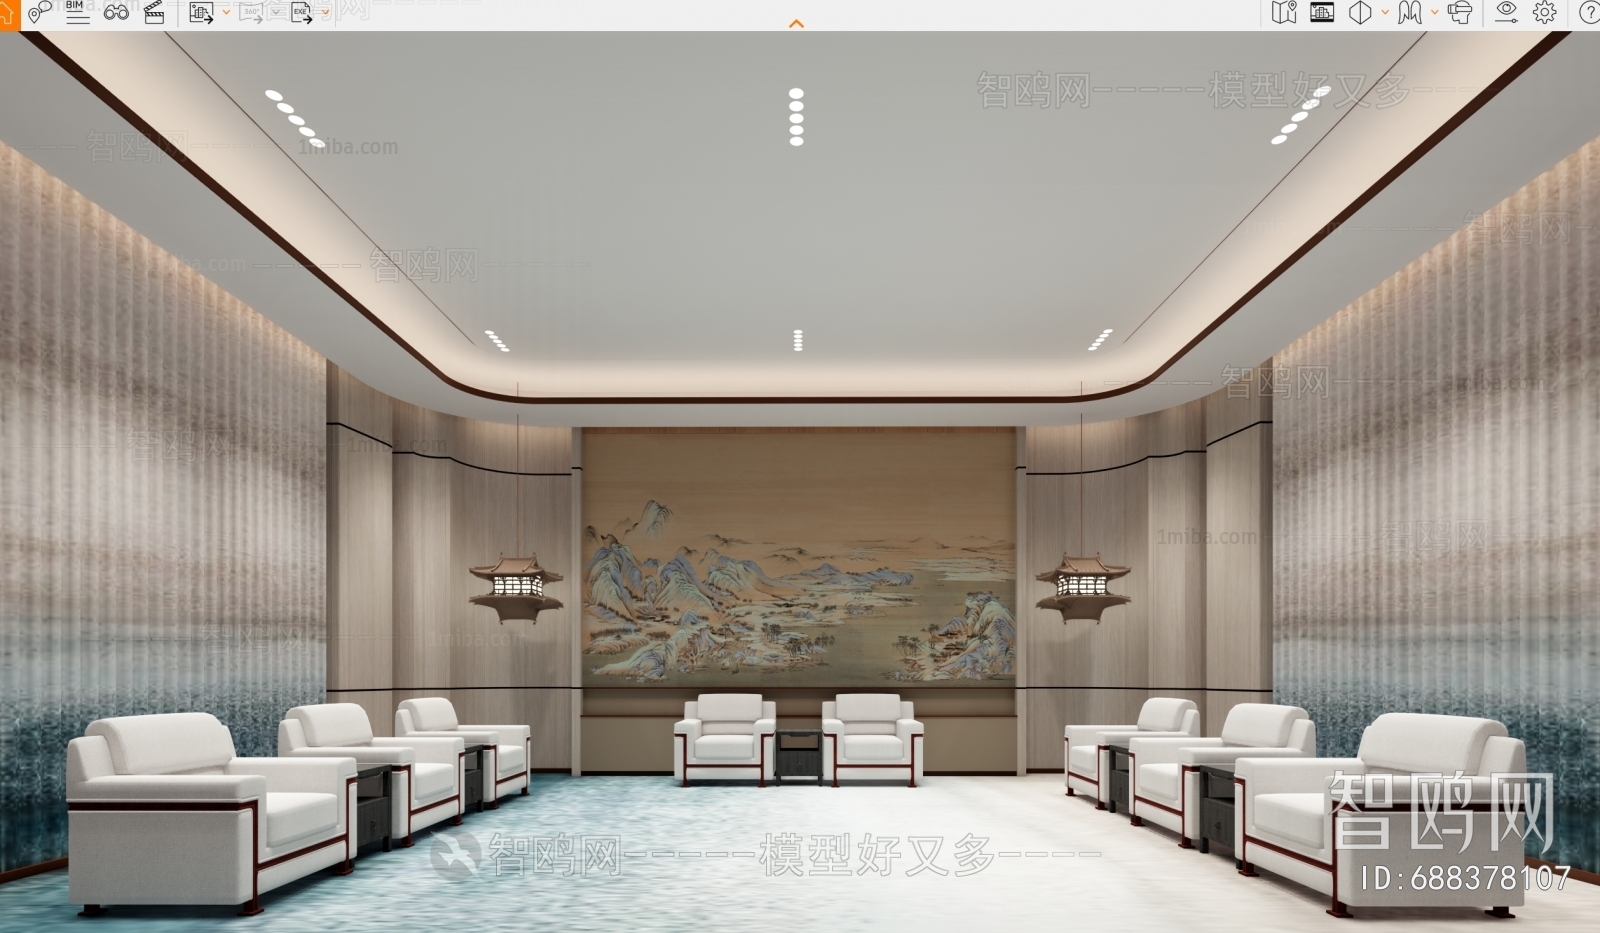 New Chinese Style Reception Area